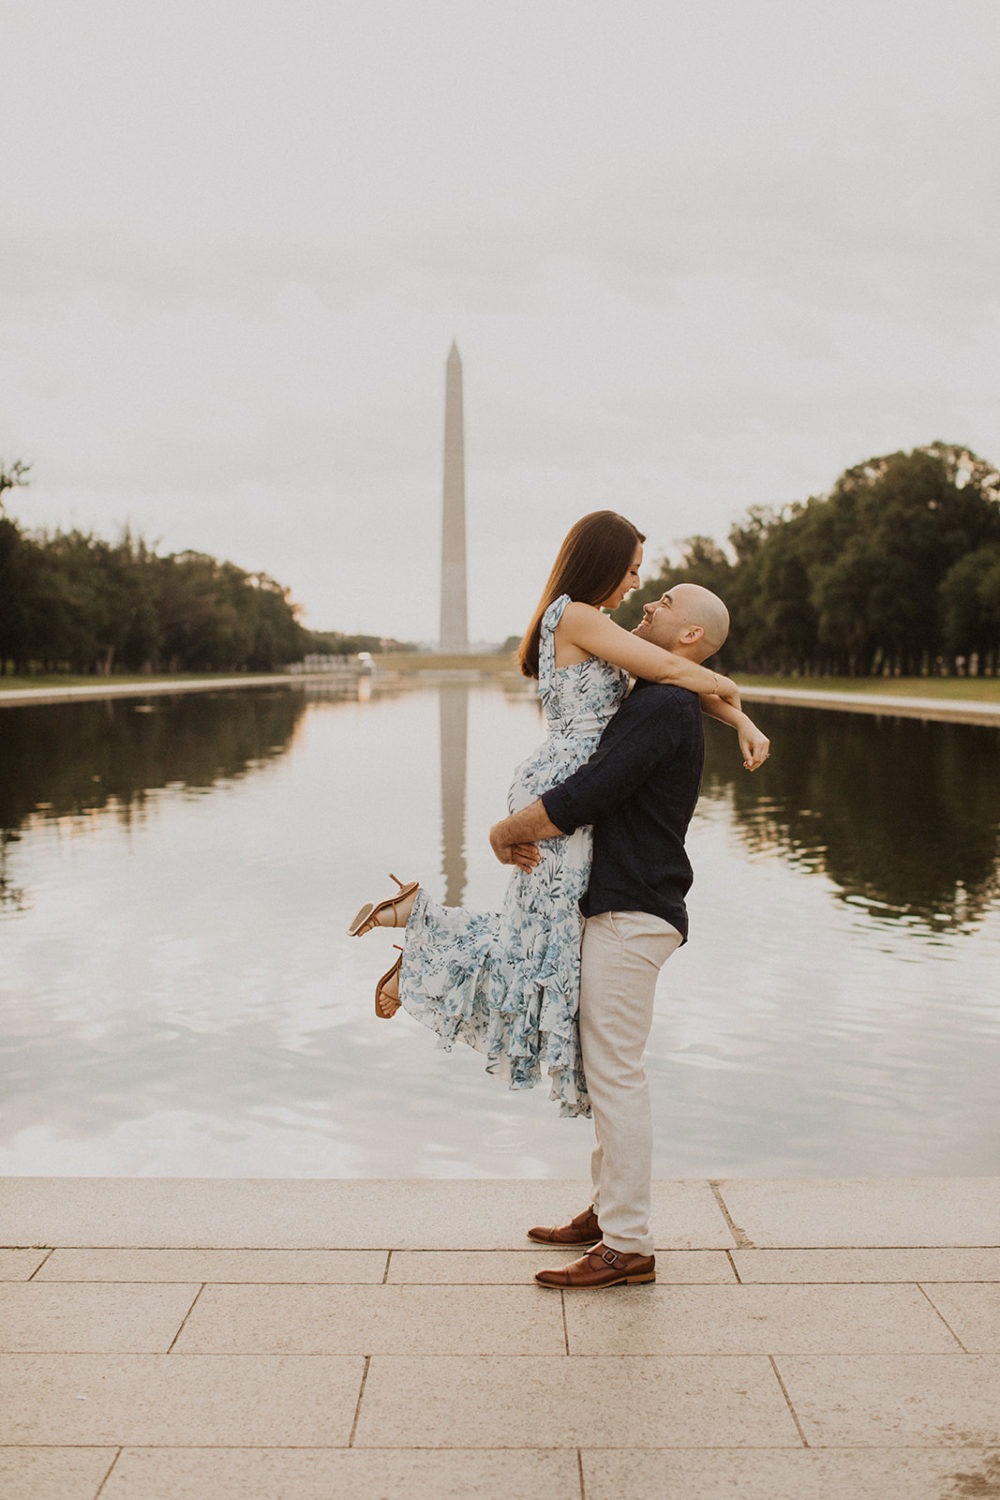 Man lifts woman by reflecting pool at sunrise DC engagement session